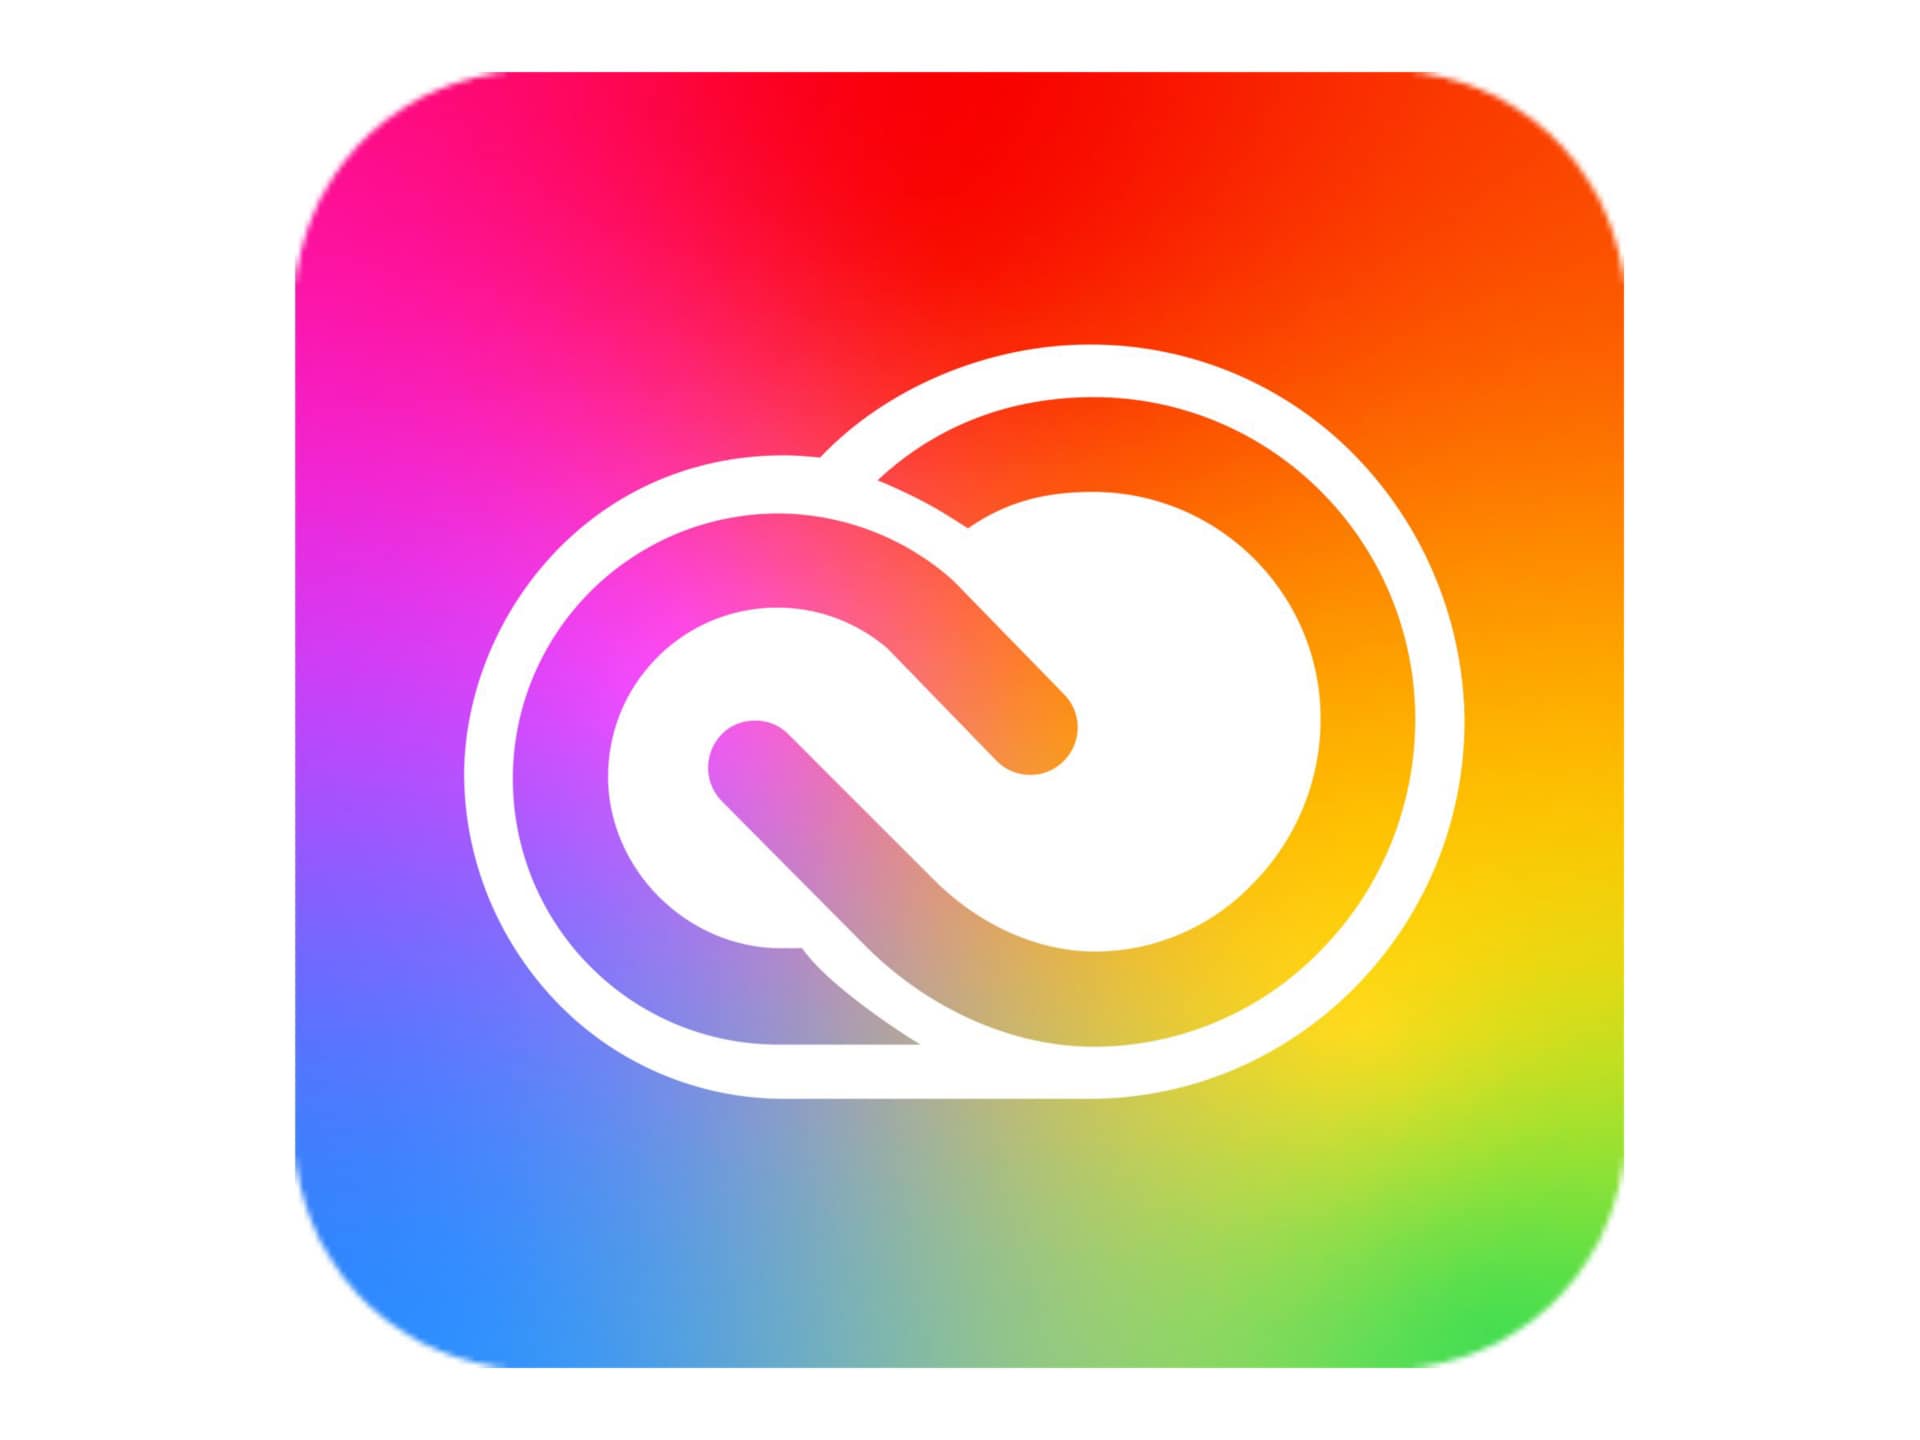 Adobe Creative Cloud for Enterprise - All Apps - Subscription New (2 years)